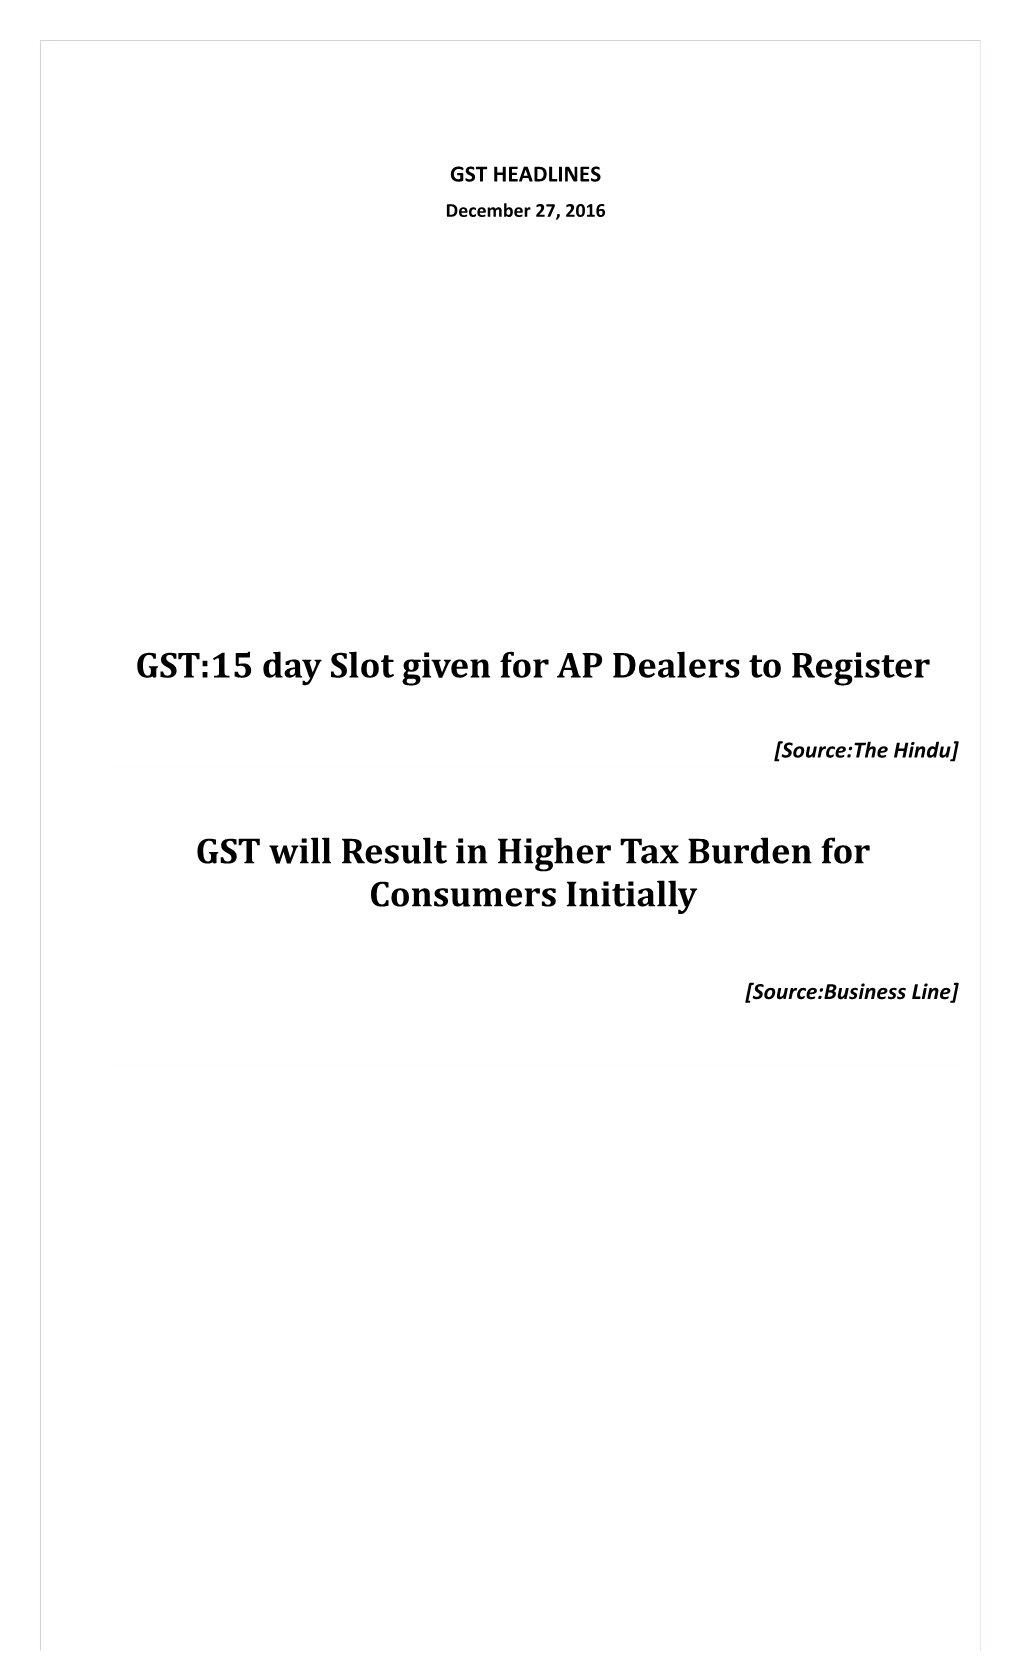 GST:15 Day Slot Given for AP Dealers to Register